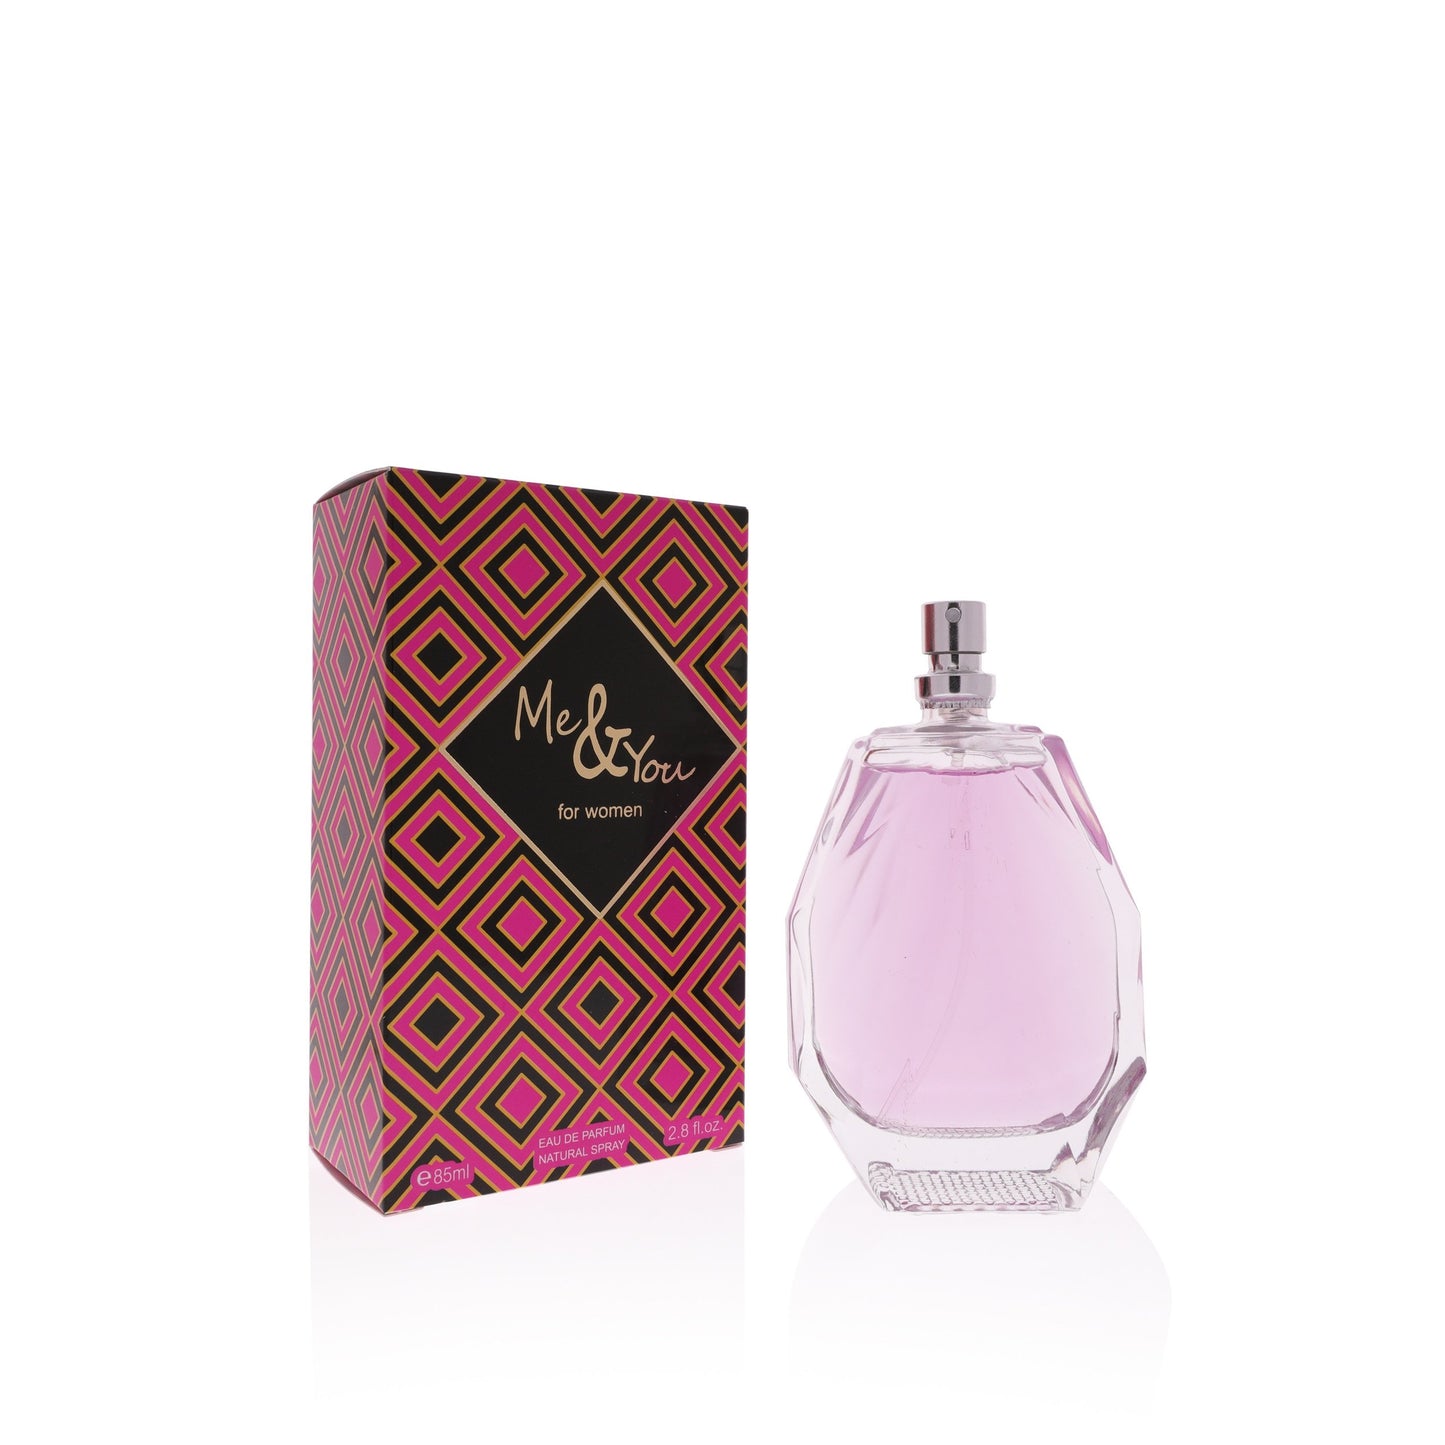 Me & You Women's Fragrance: Embrace the Intimate Harmony of this Captivating and Romantic Scent - A Must-Have for the Modern Woman's Signature Collection!